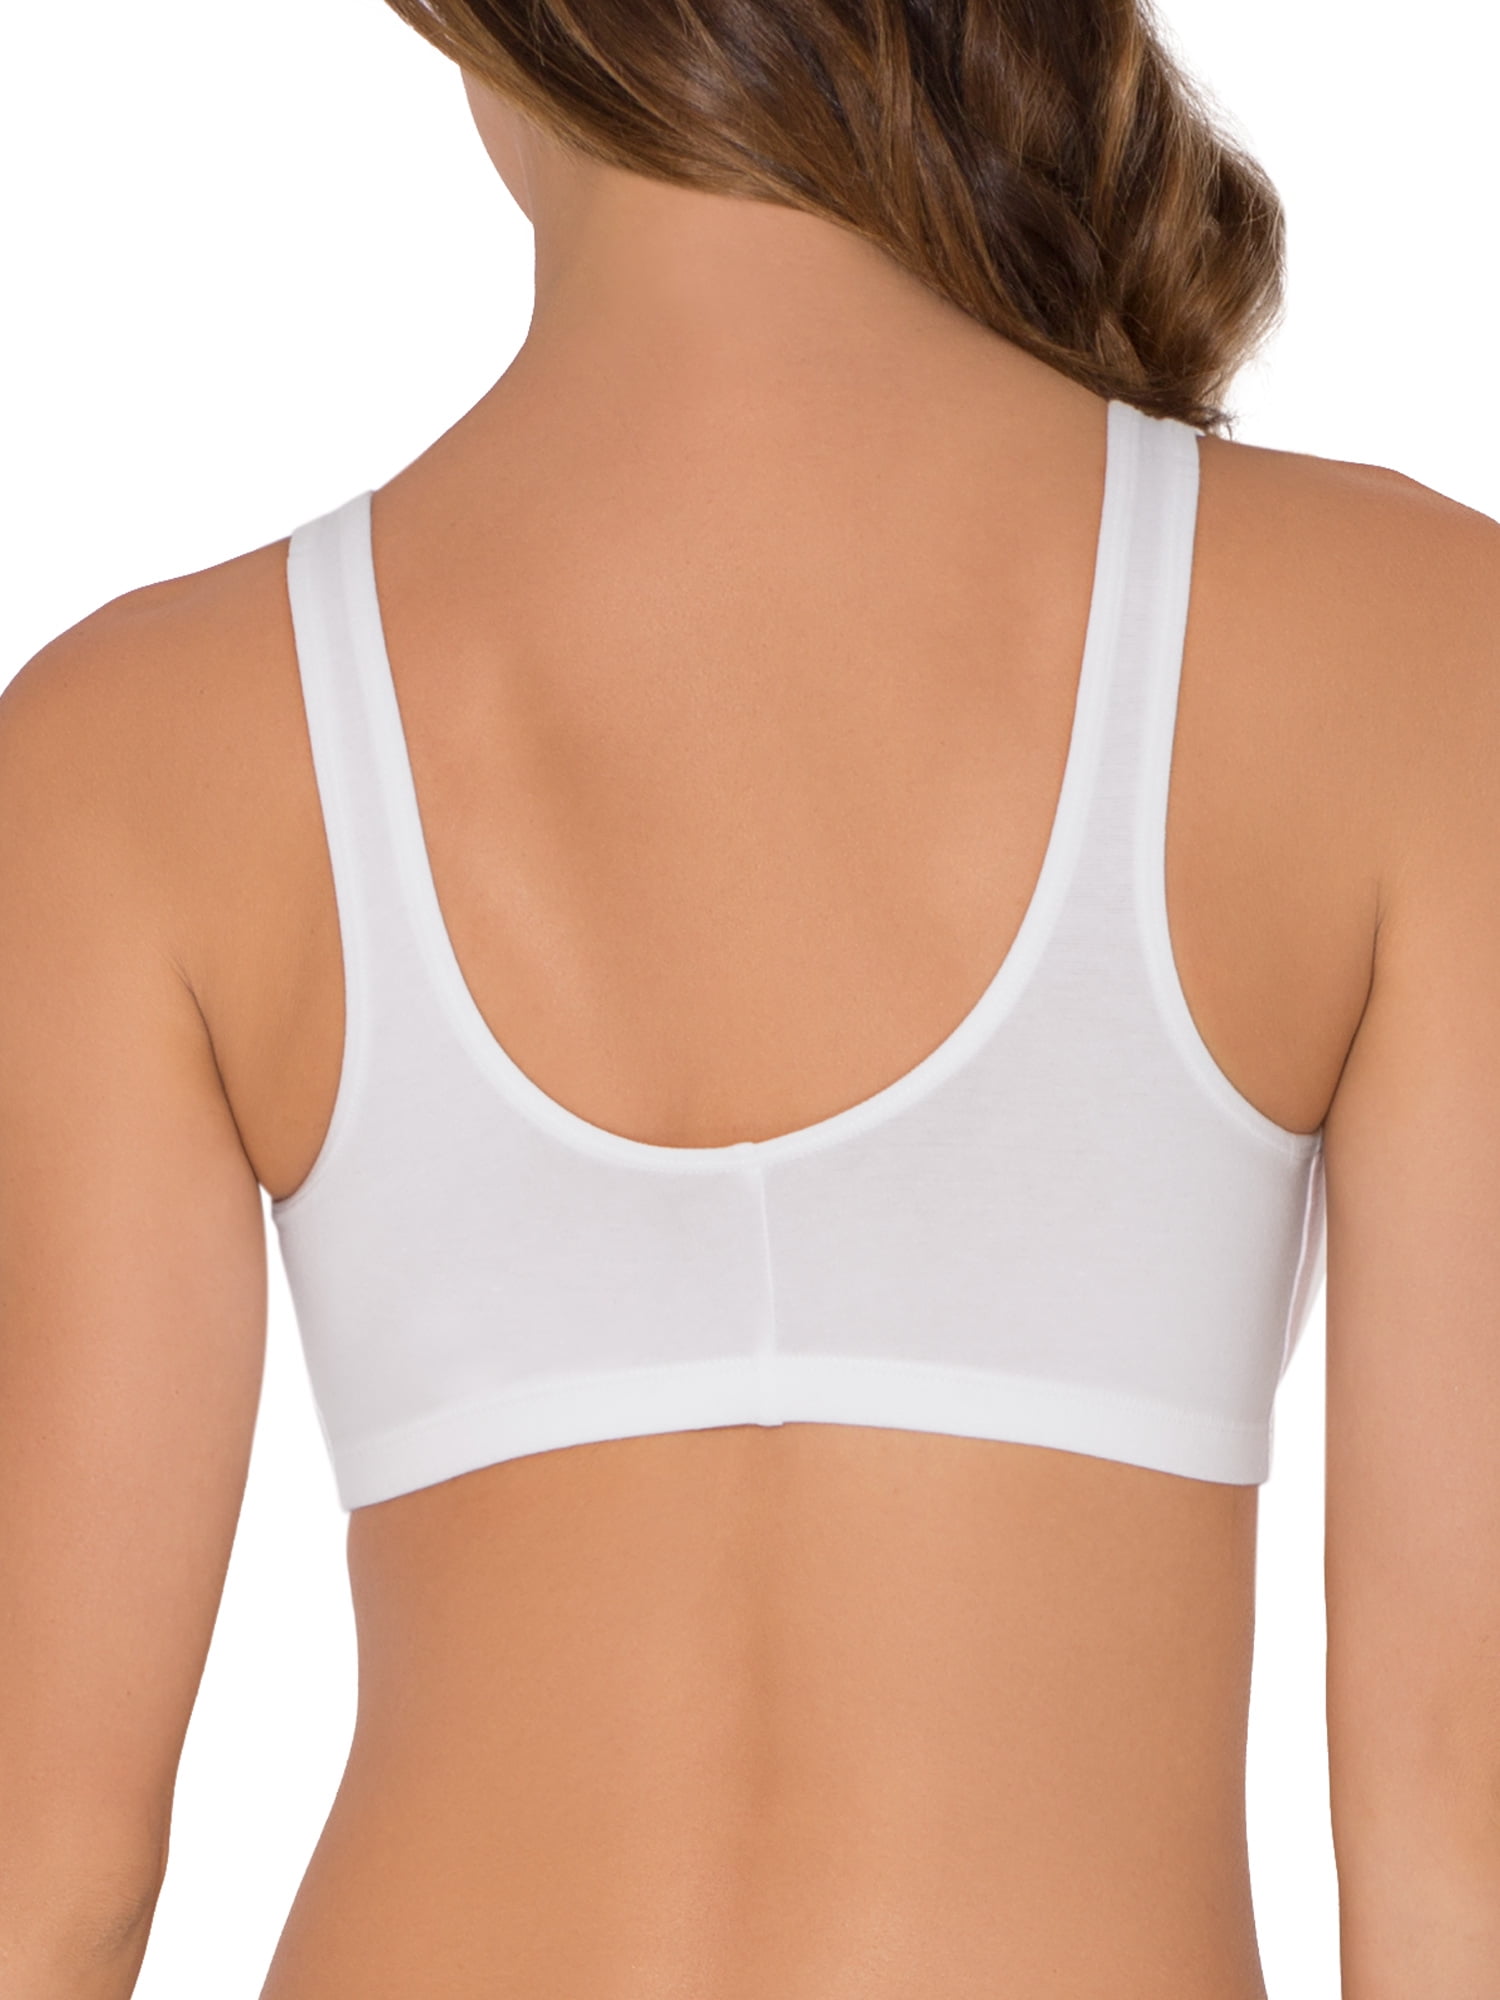 Fruit of the Loom Women's Comfort Front Close Sports Bra, Style 96014